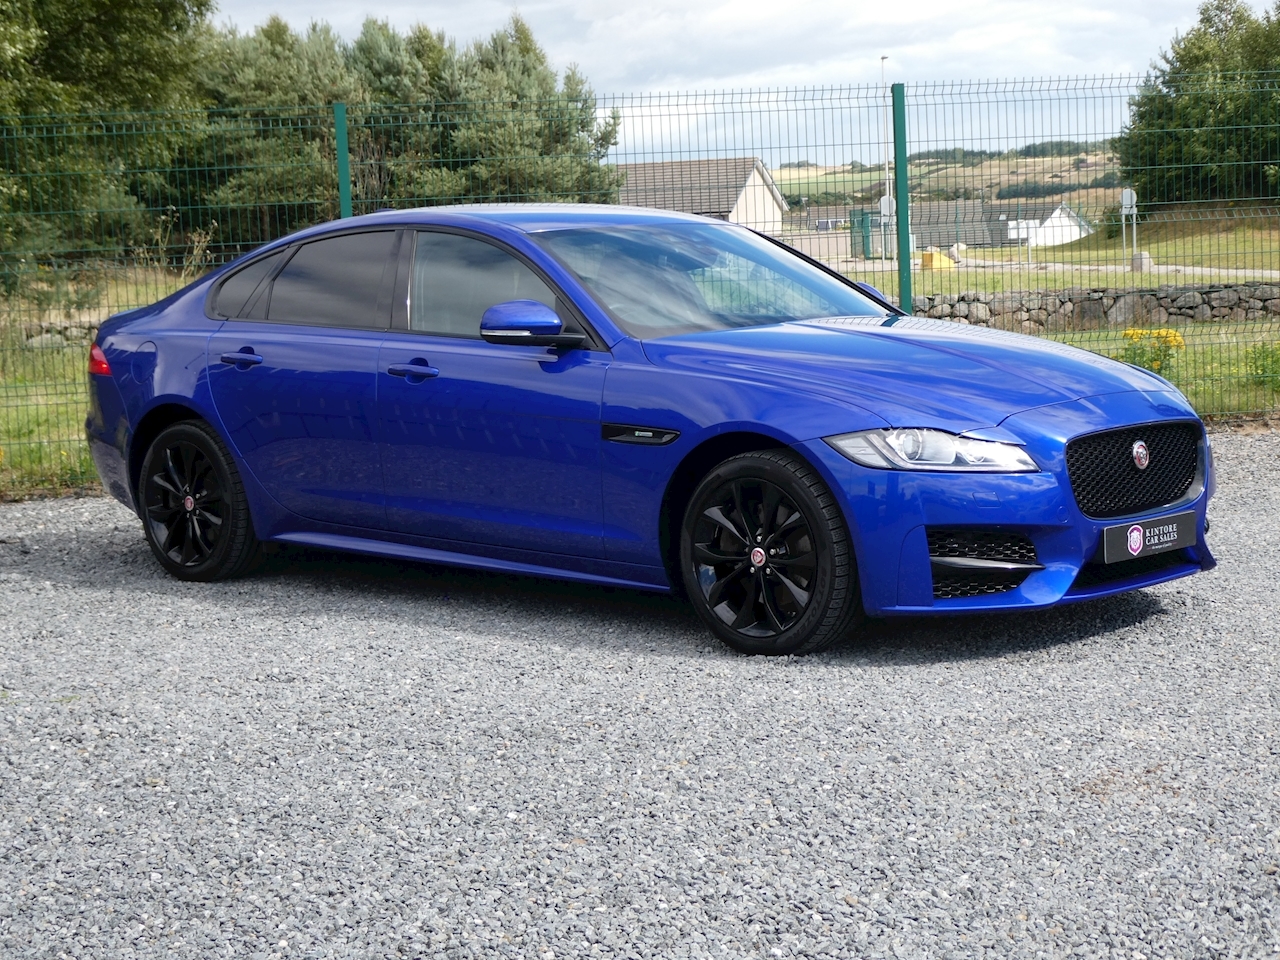 XF 2.0d R-Sport, Automatic 2.0 4dr Saloon Automatic Diesel